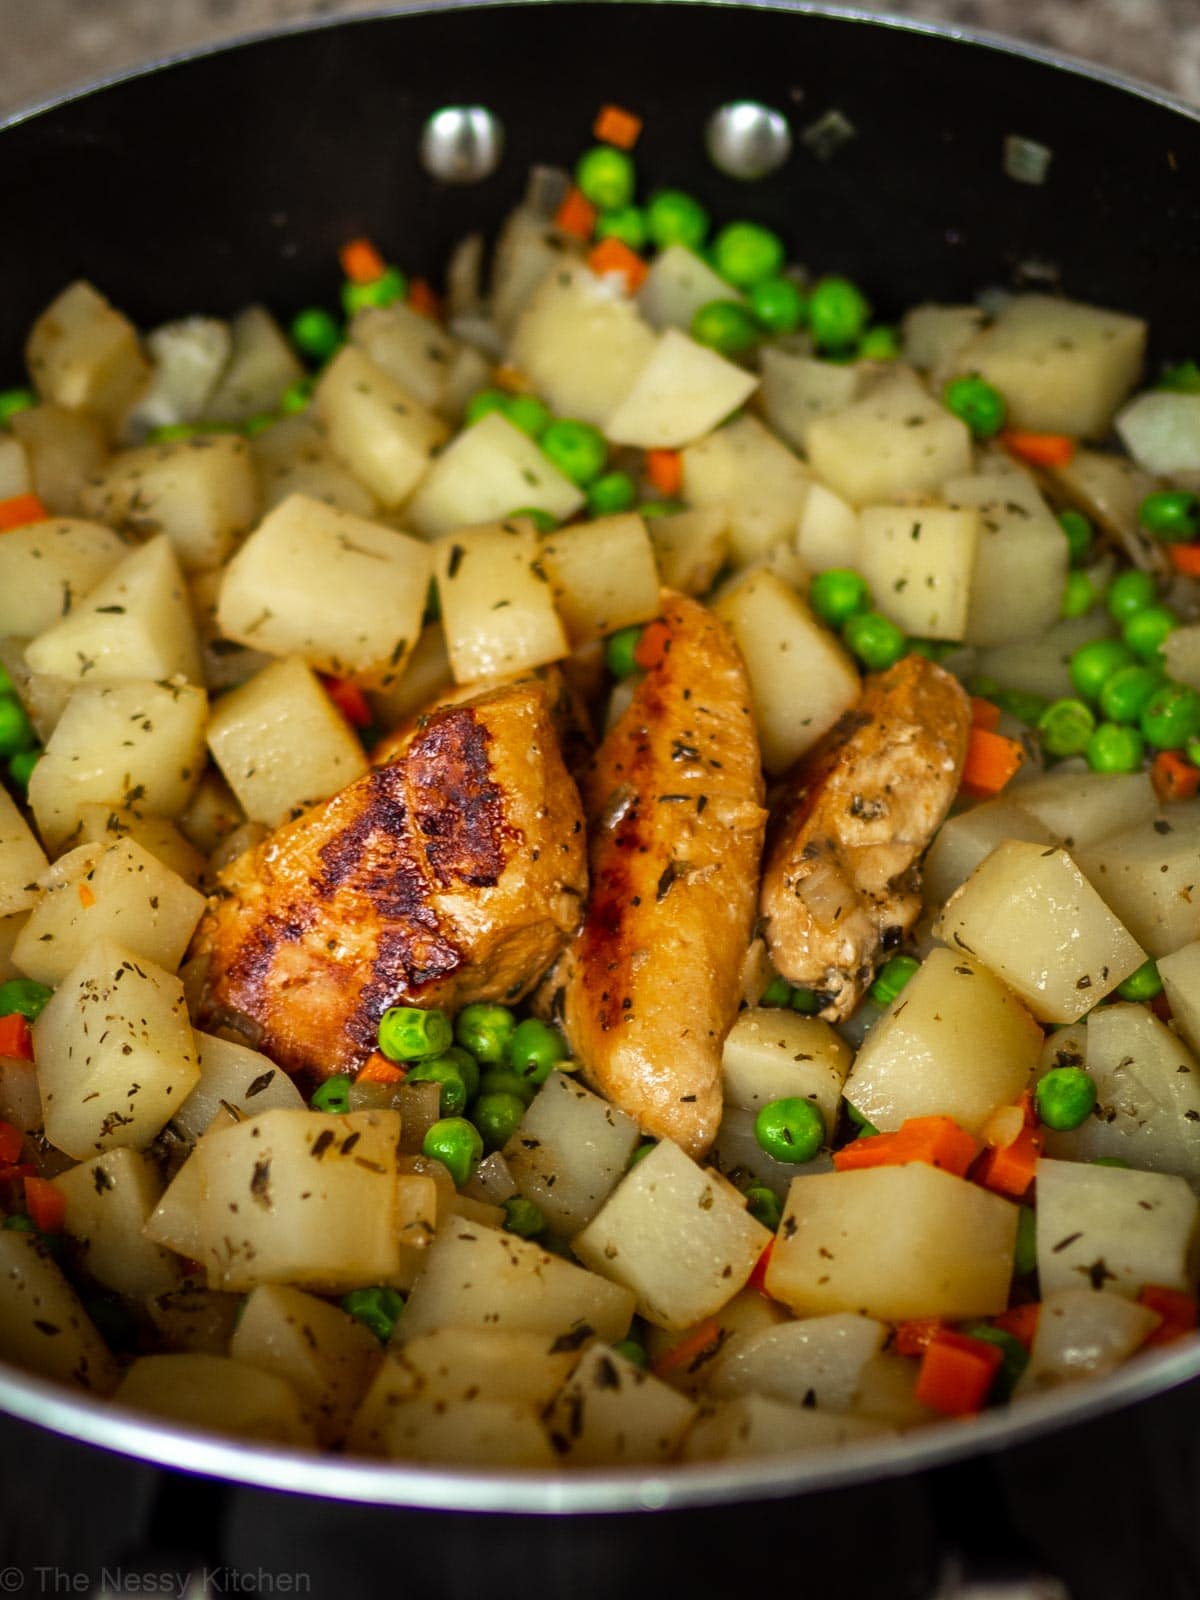 Close up shot showing nicely browned chicken in a skillet with potatoes and vegetables.